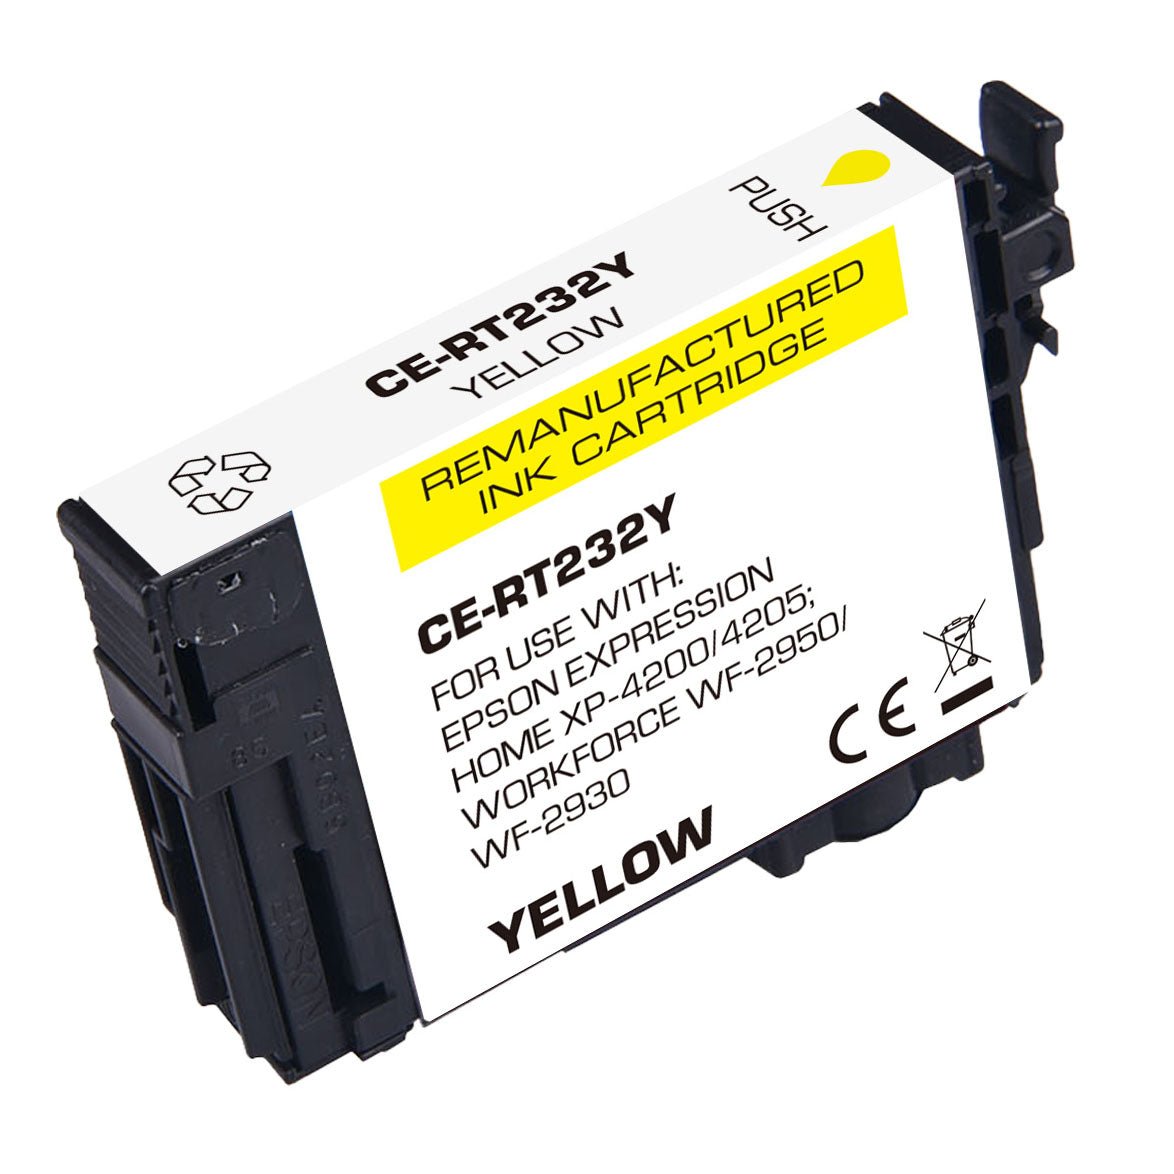 Remanufactured Epson T232 Yellow Ink Cartridges - Linford Office:Printer Ink & Toner Cartridge